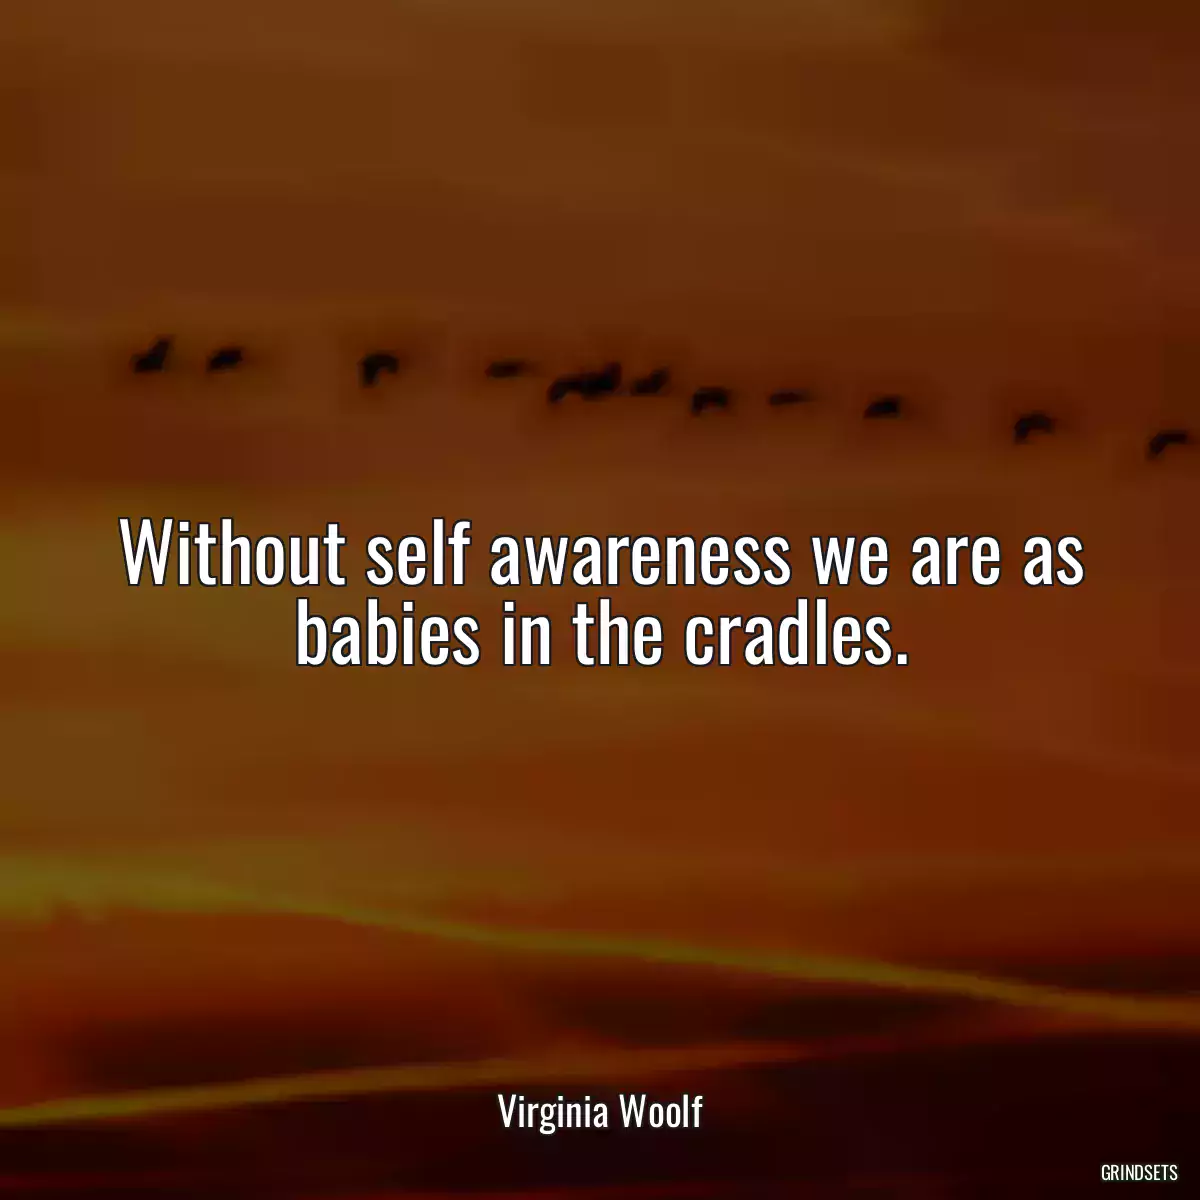 Without self awareness we are as babies in the cradles.